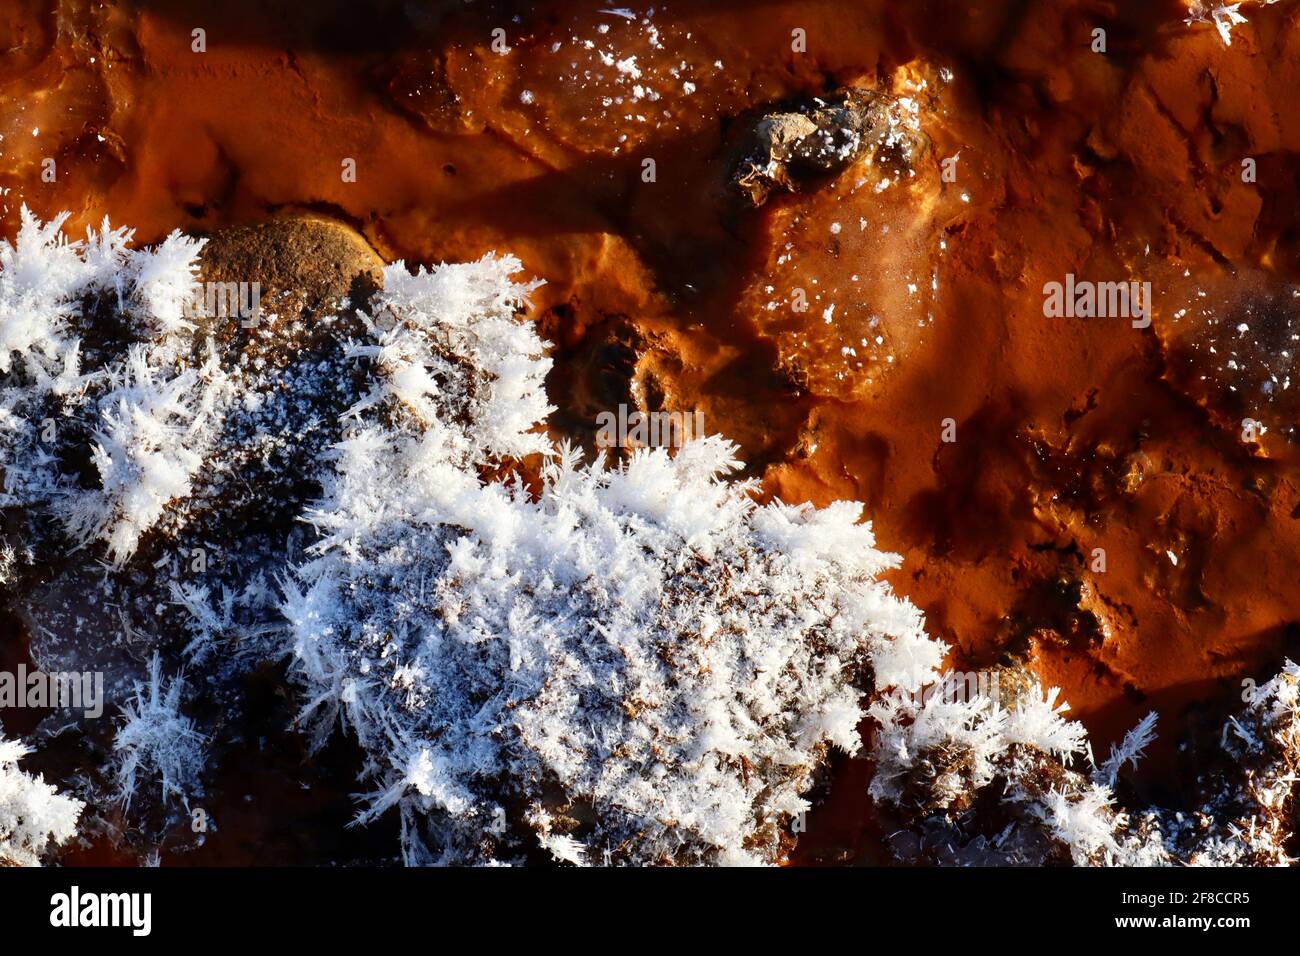 Nature’s creative elegance: Ice sculptures, ice flowers and hoar frost, combined with the clear waters and iron-red rocks of the Yukon River. Stock Photo